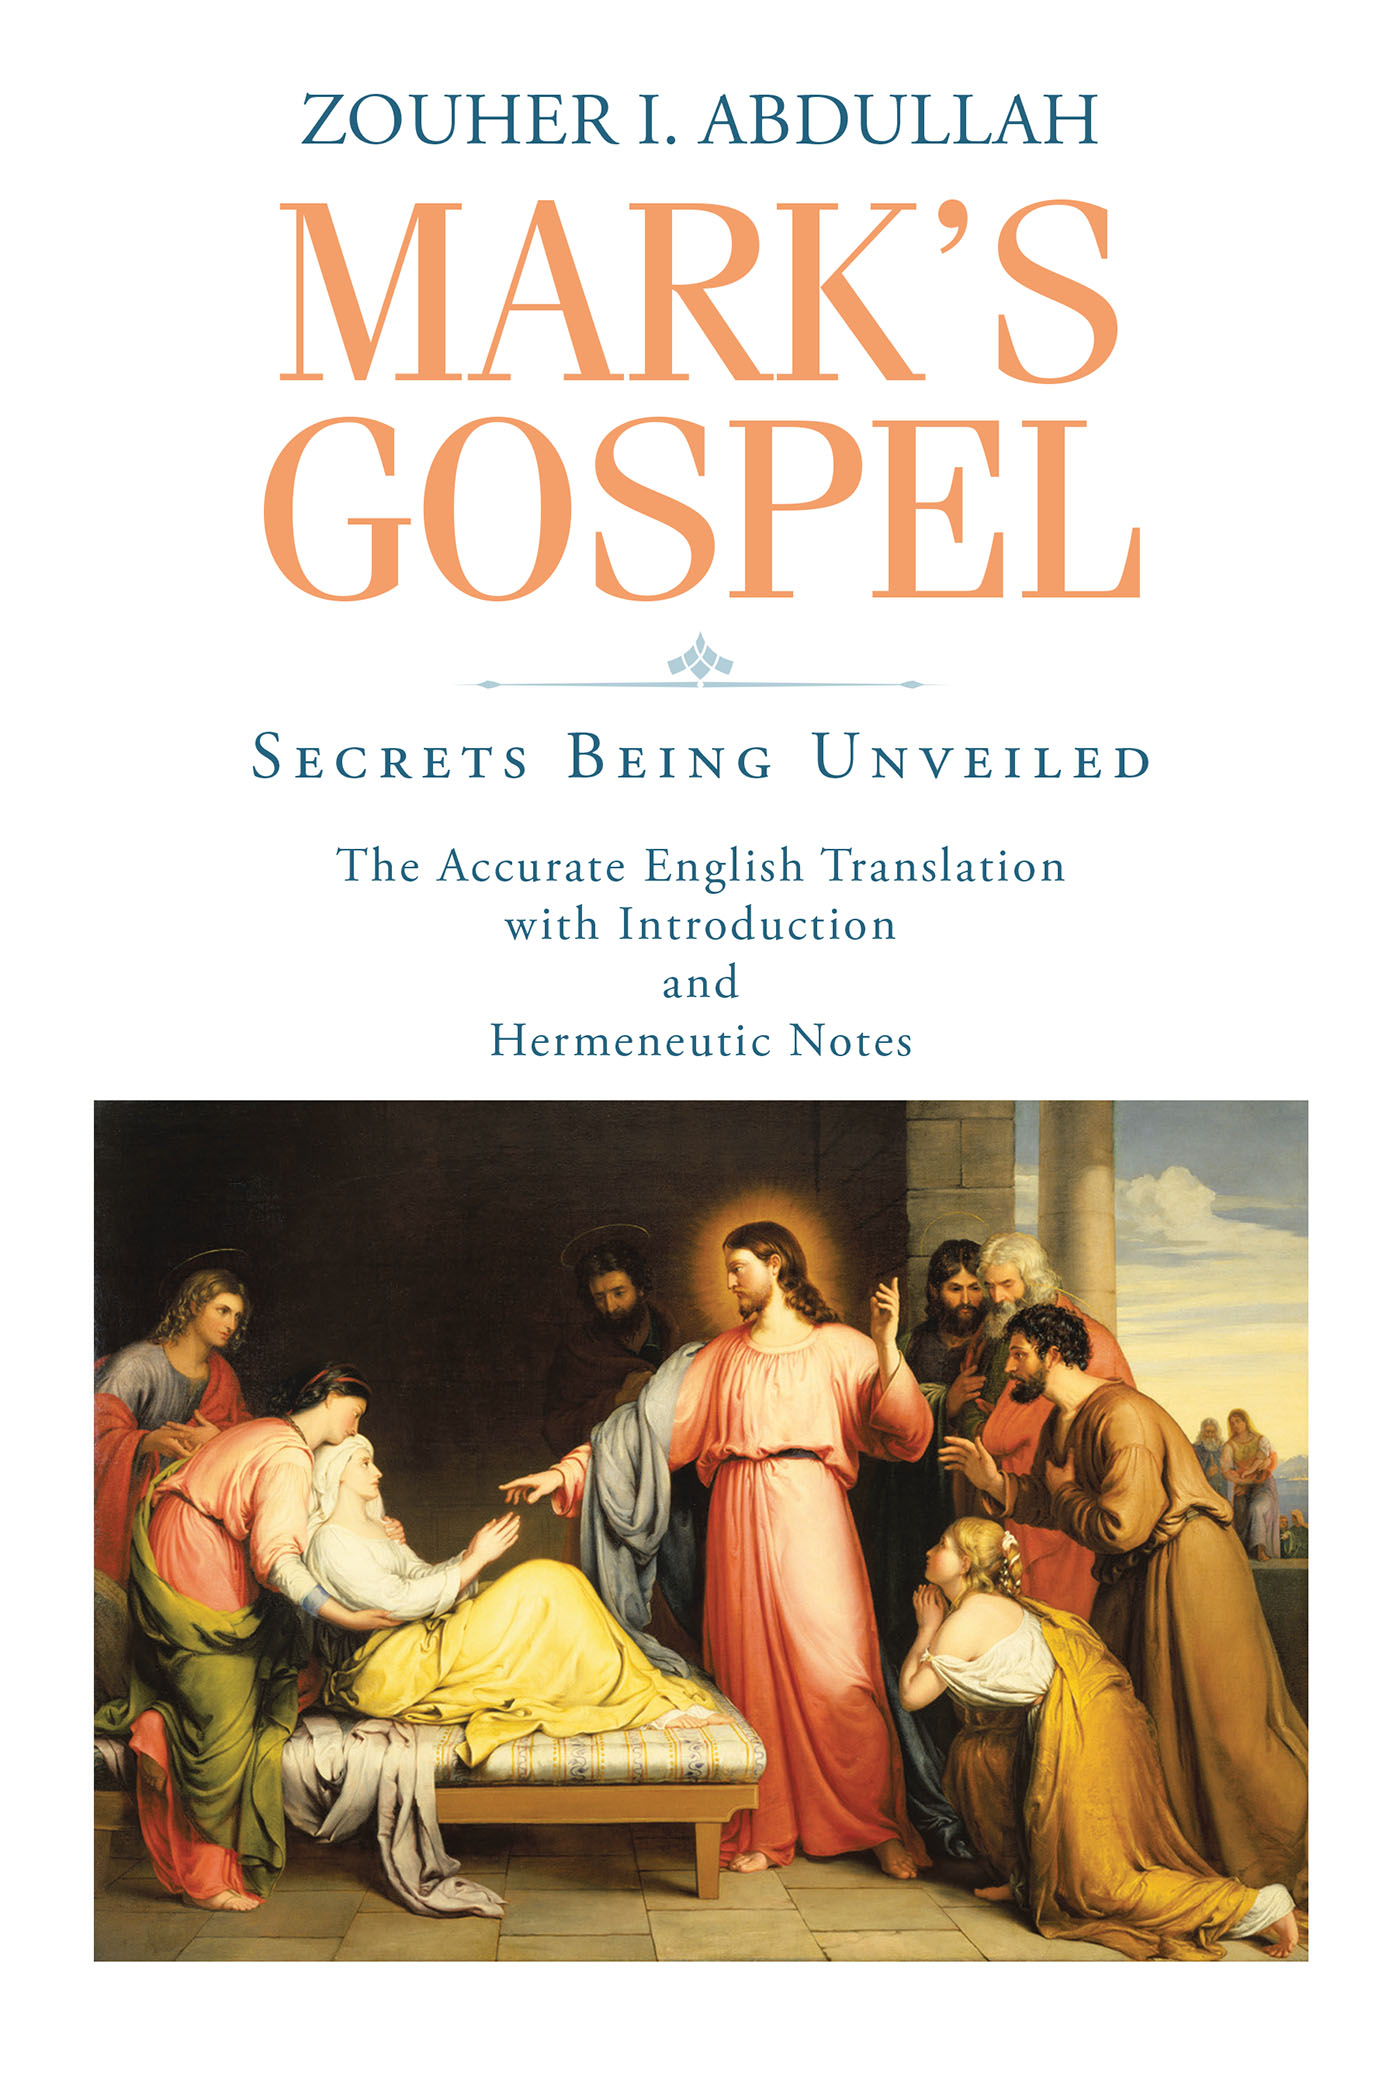 Zouher I. Abdullah’s Newly Released "Mark’s Gospel: Secrets Being Unveiled" is a Precise and Articulate Translation of the Original Greek